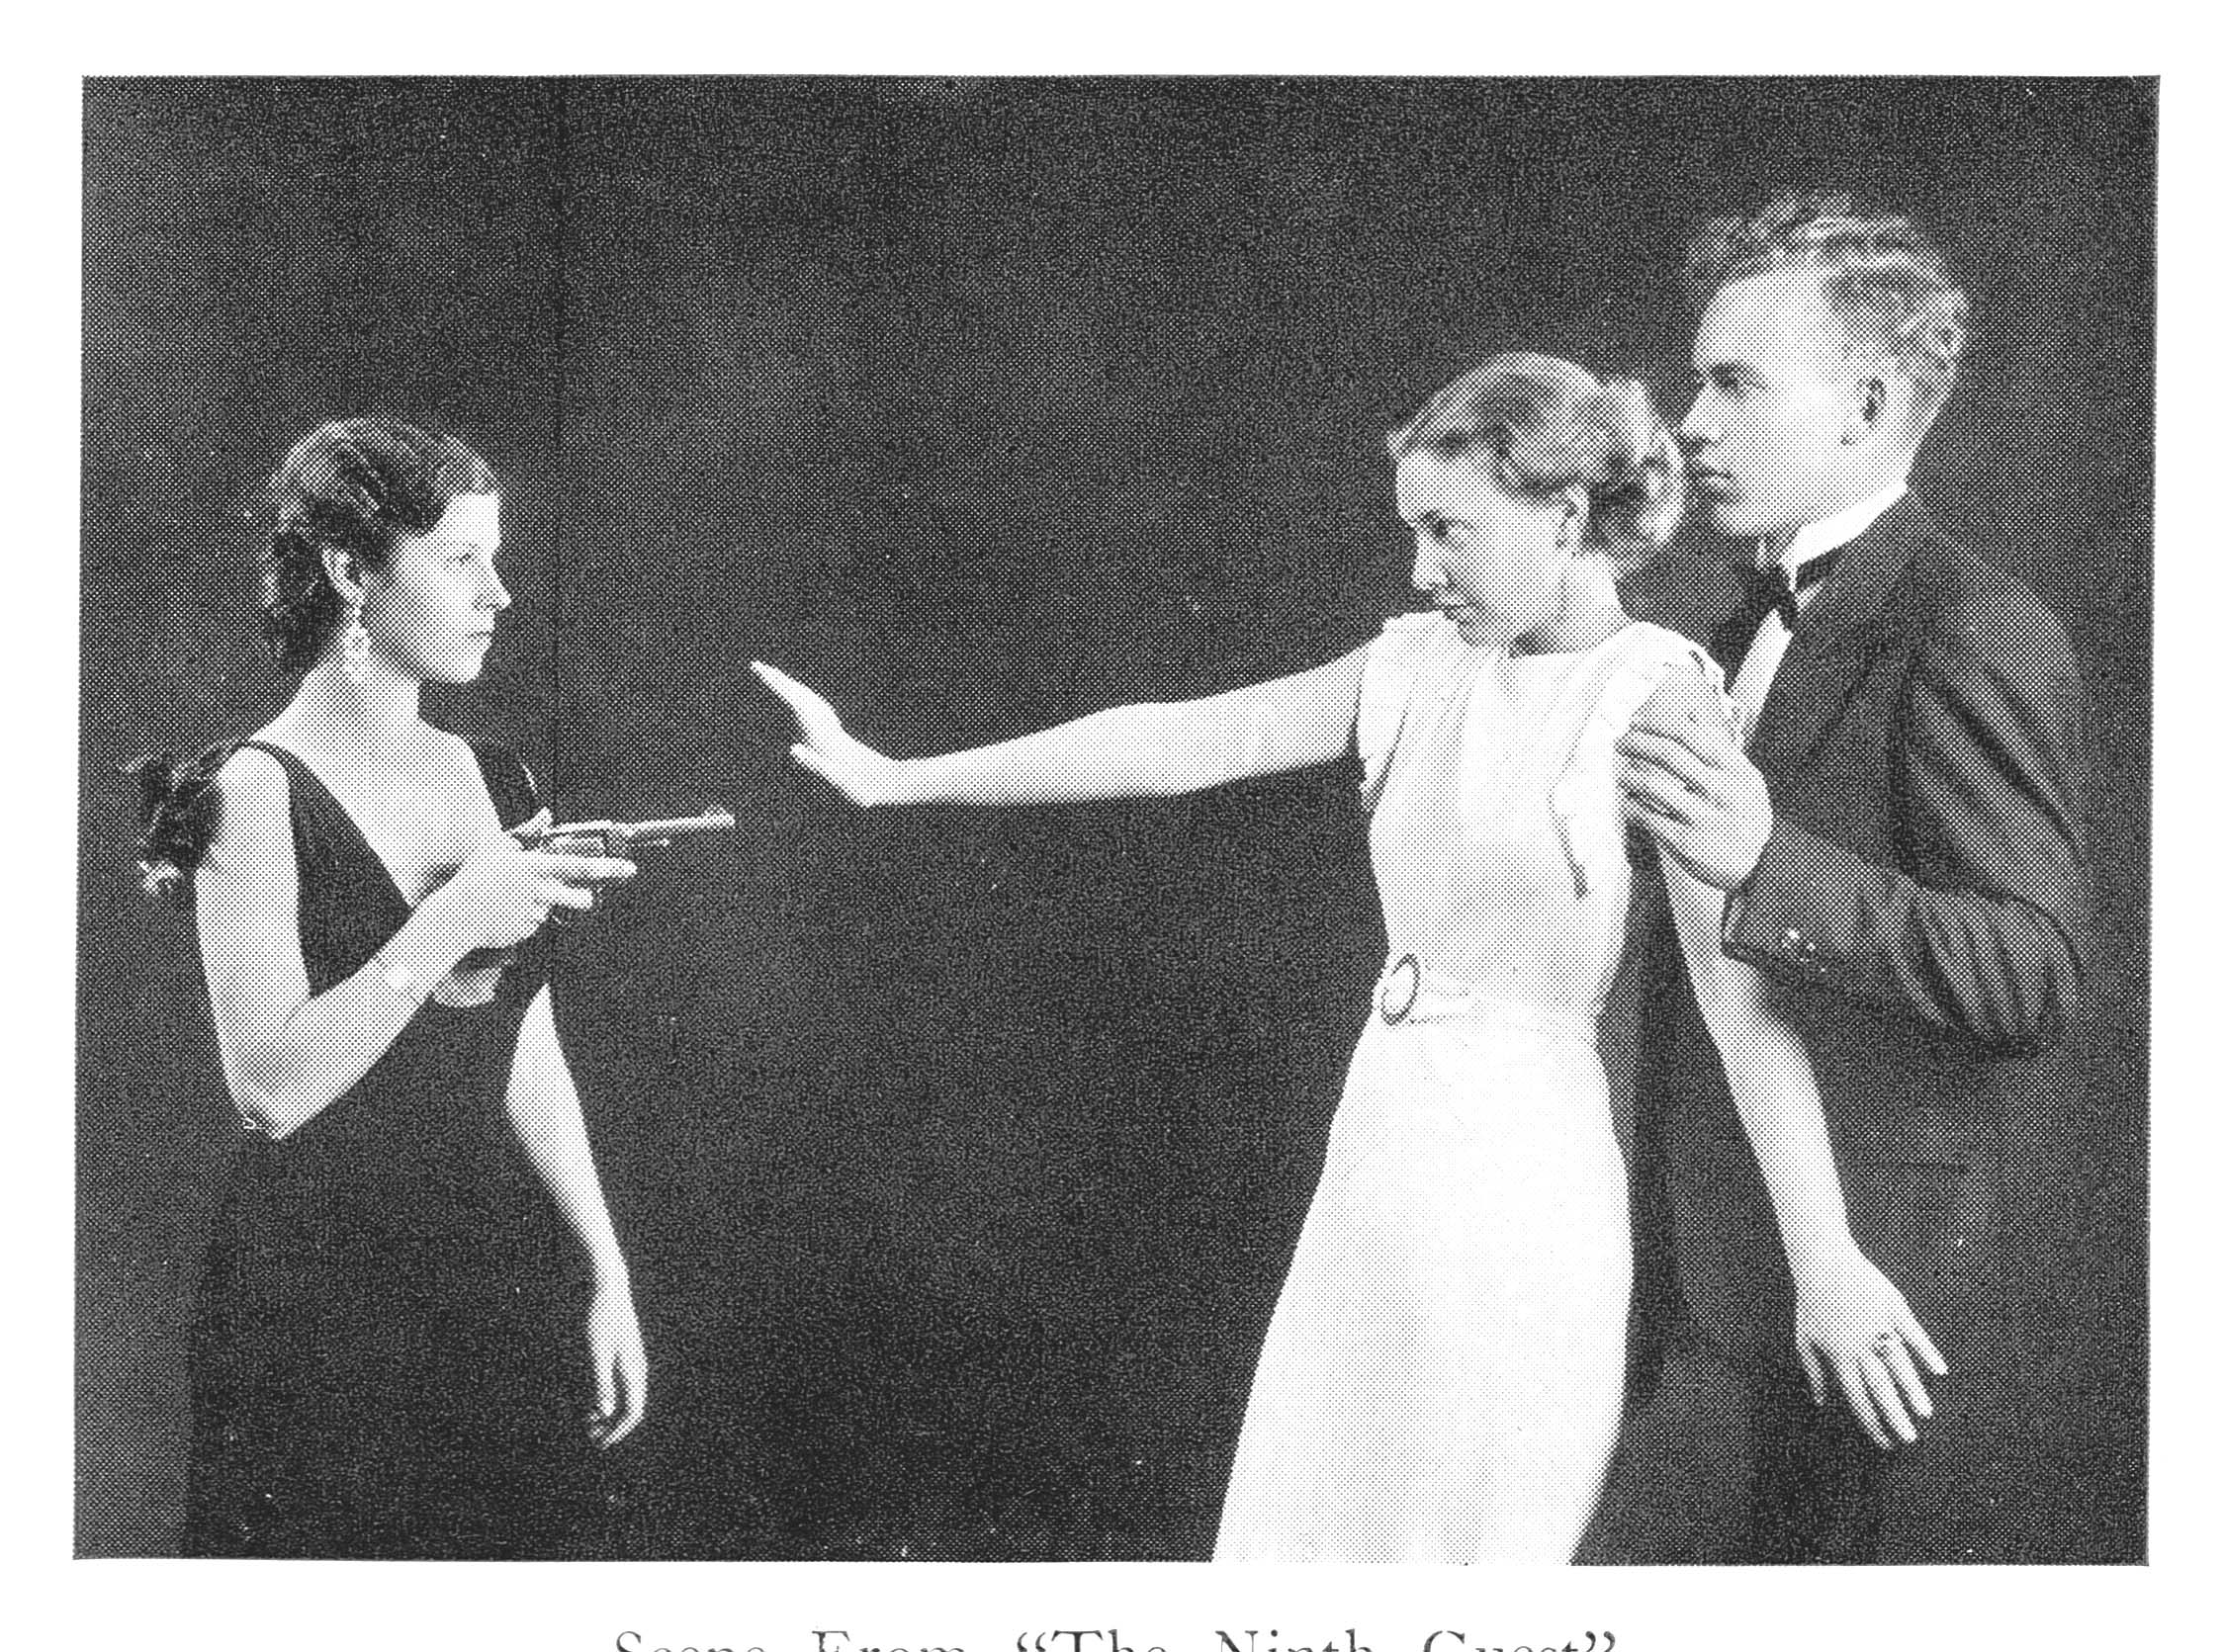 A woman points a prop gun at another woman and a man during a Drexel theater production